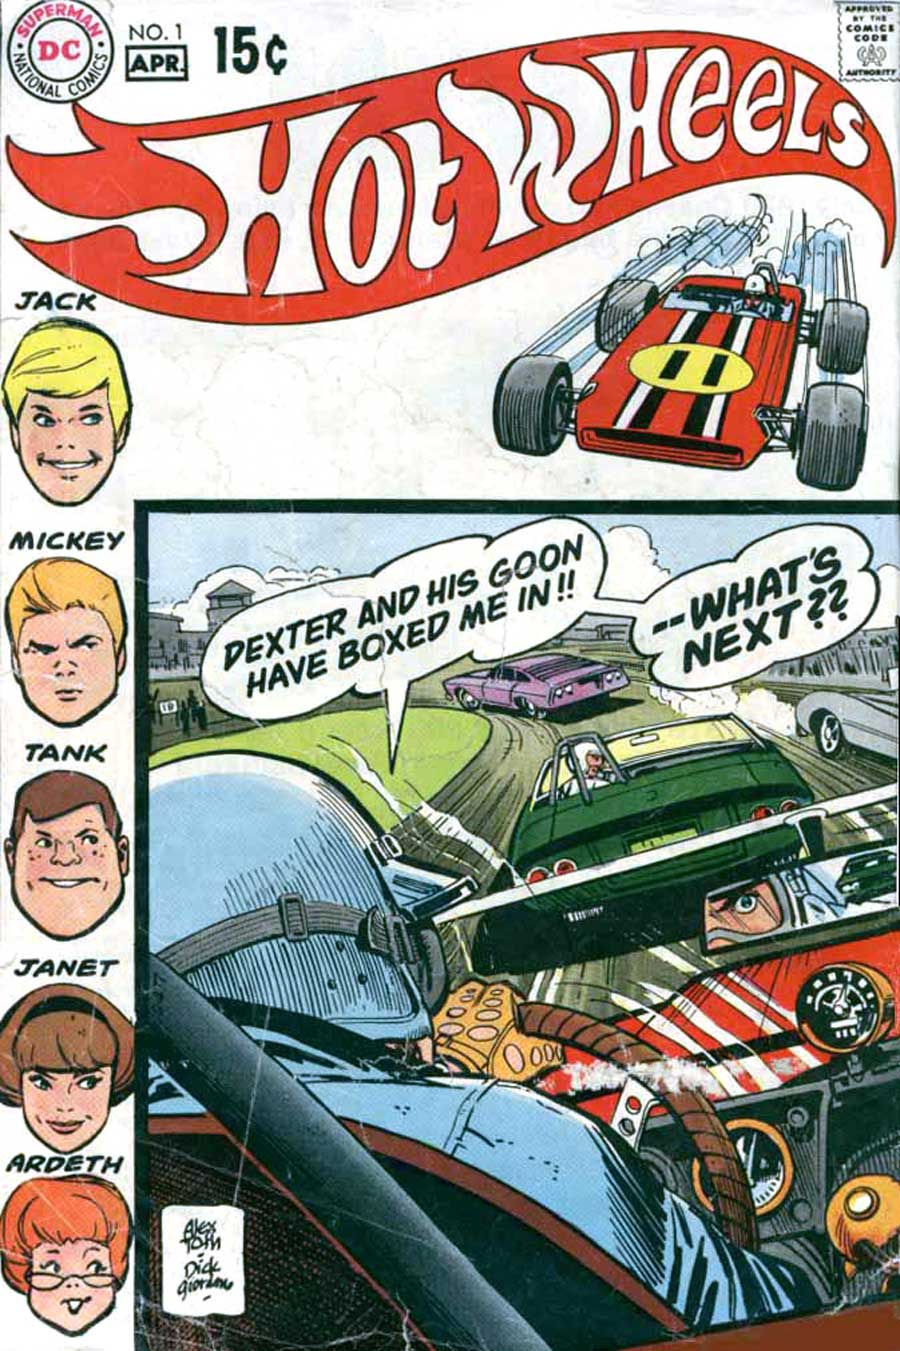 Hot Wheels v1 #1 dc 1970s bronze age comic book cover art by Alex Toth